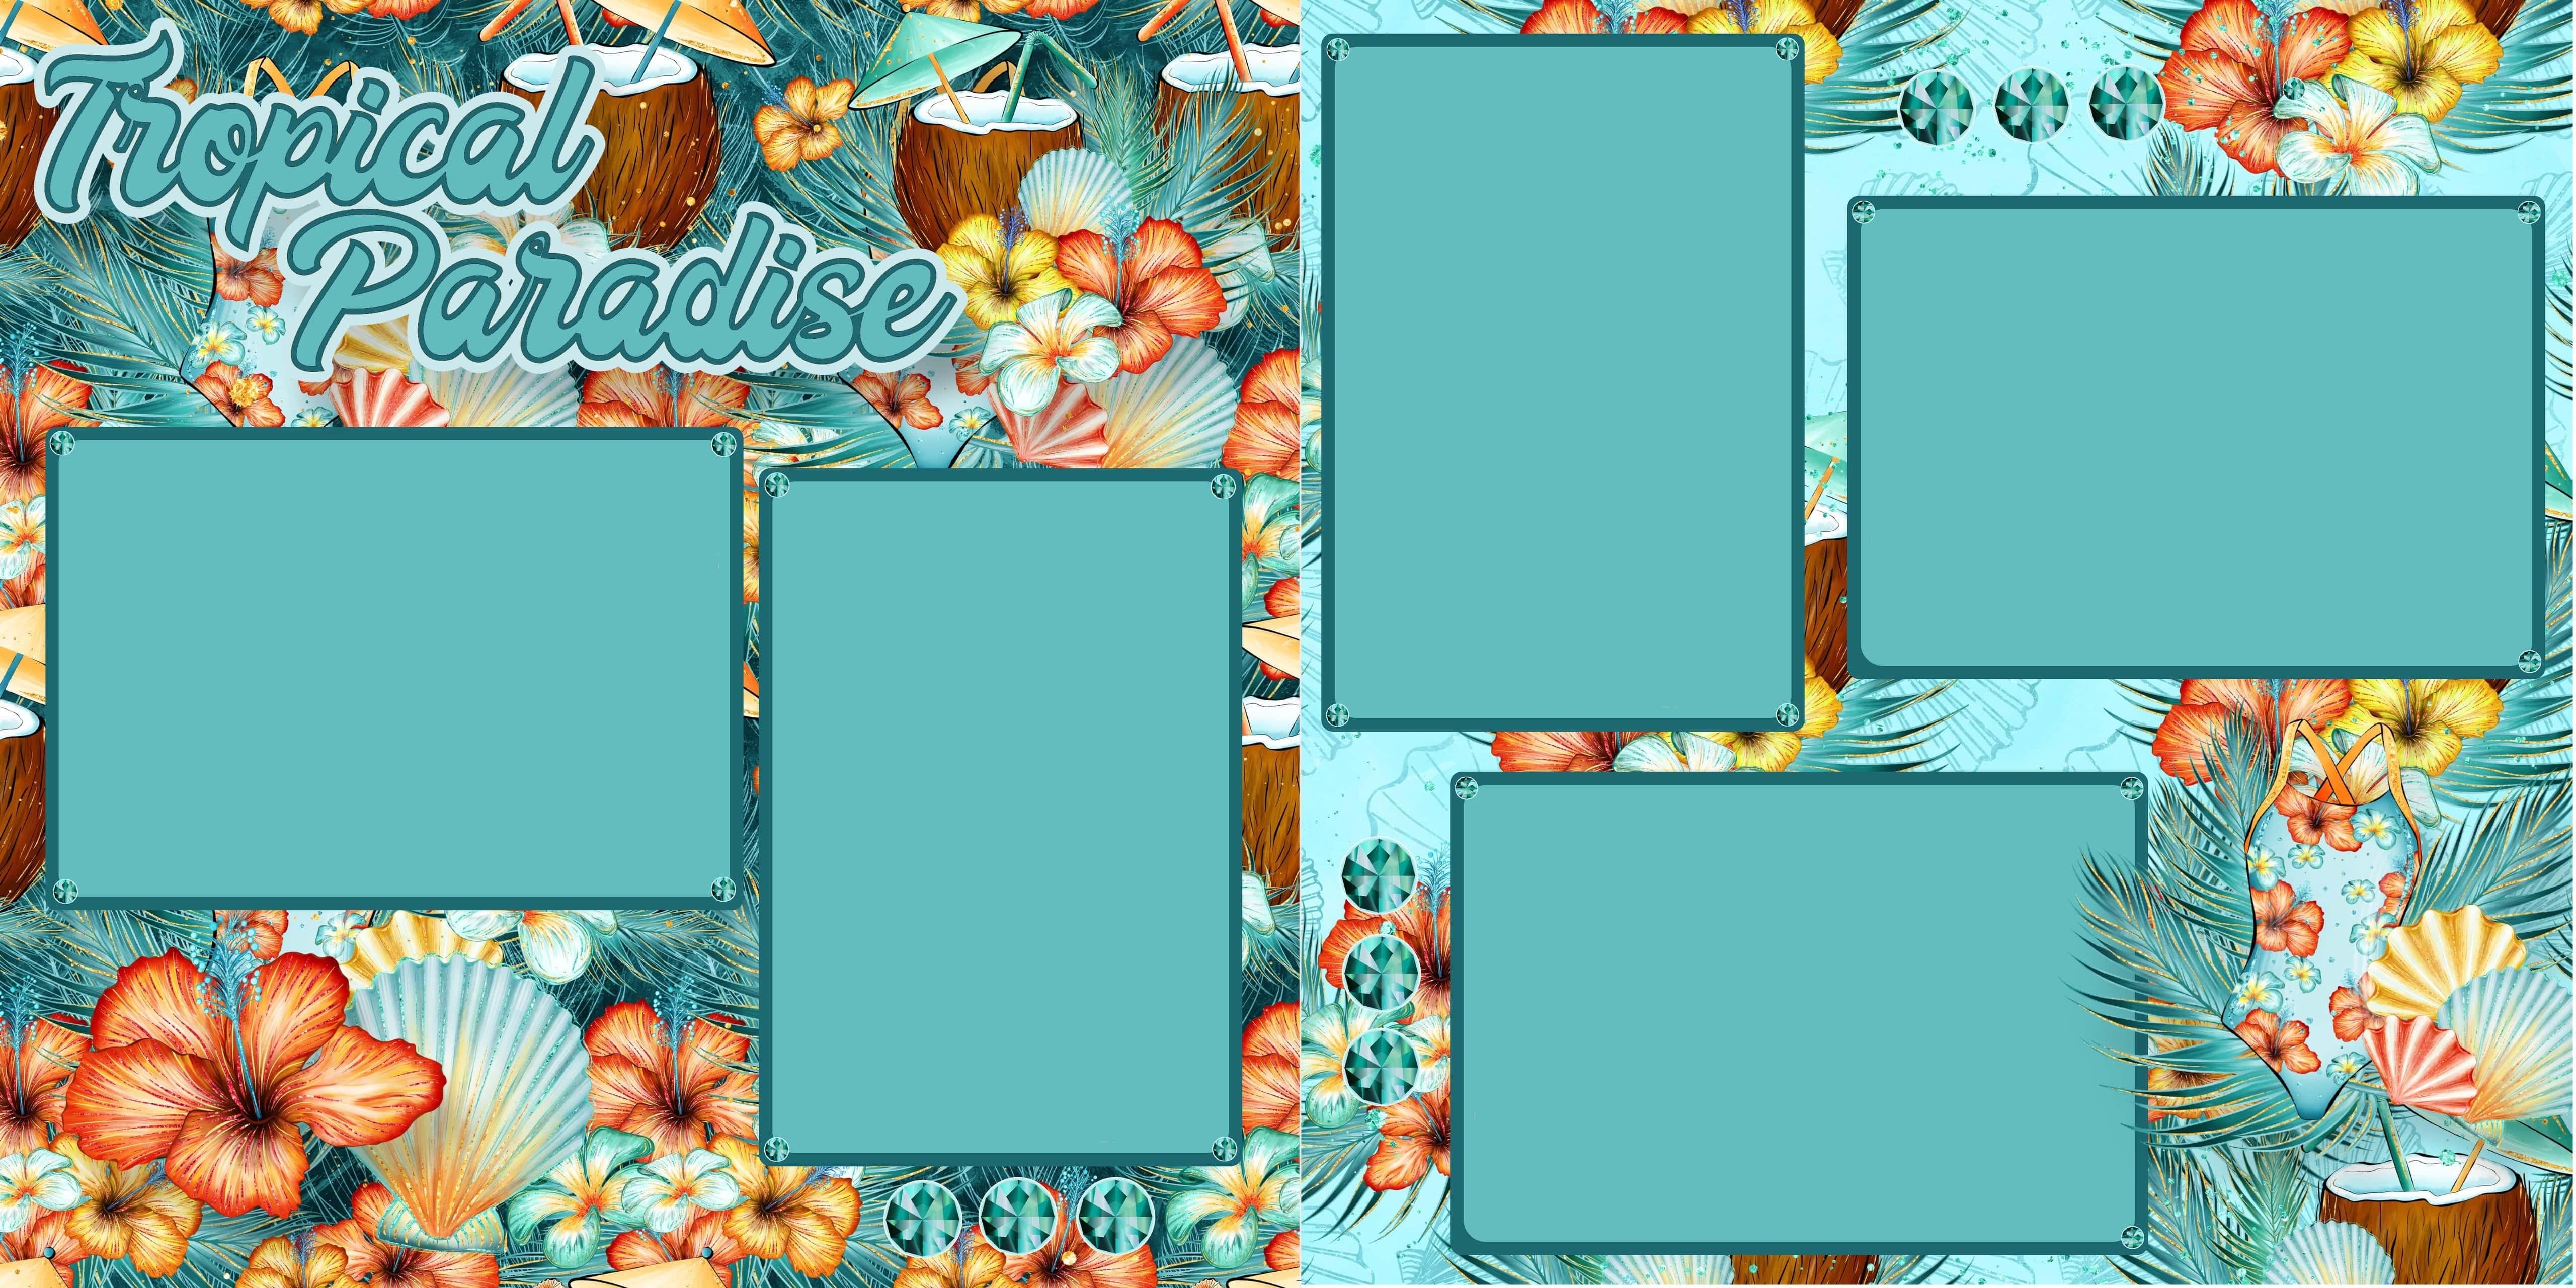 Tropical Paradise Coconuts (2) - 12 x 12 Premade, Printed Scrapbook Pages by SSC Designs